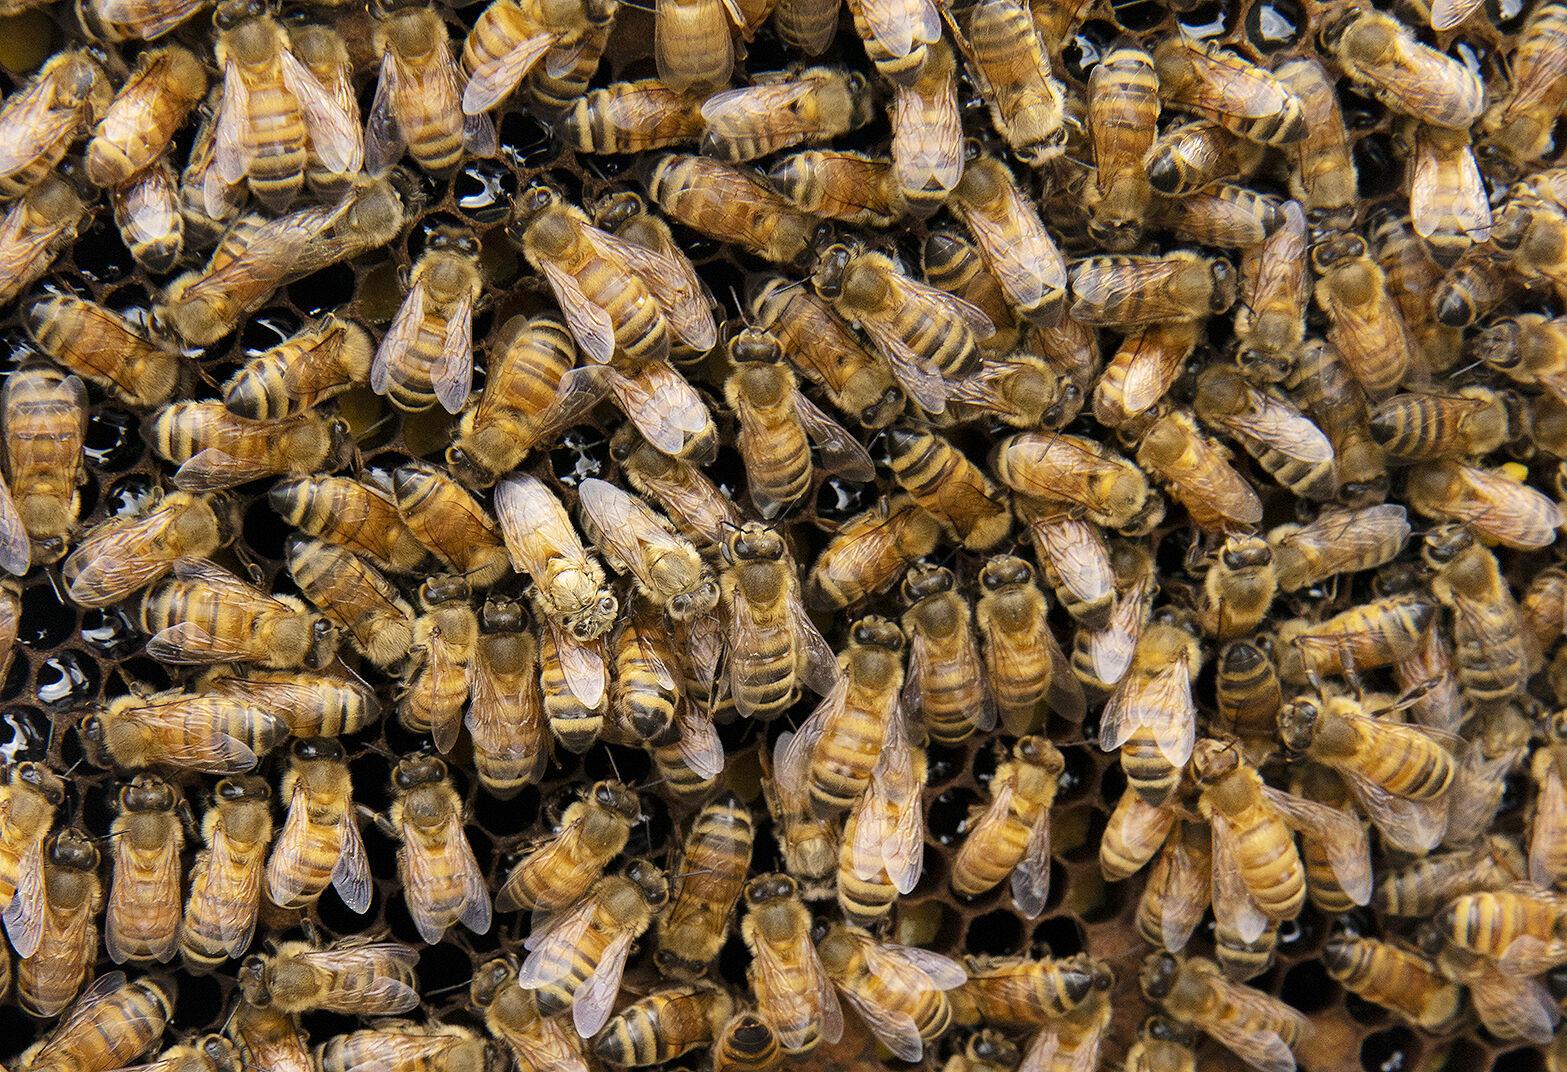 New treatment makes bees immune to pesticides